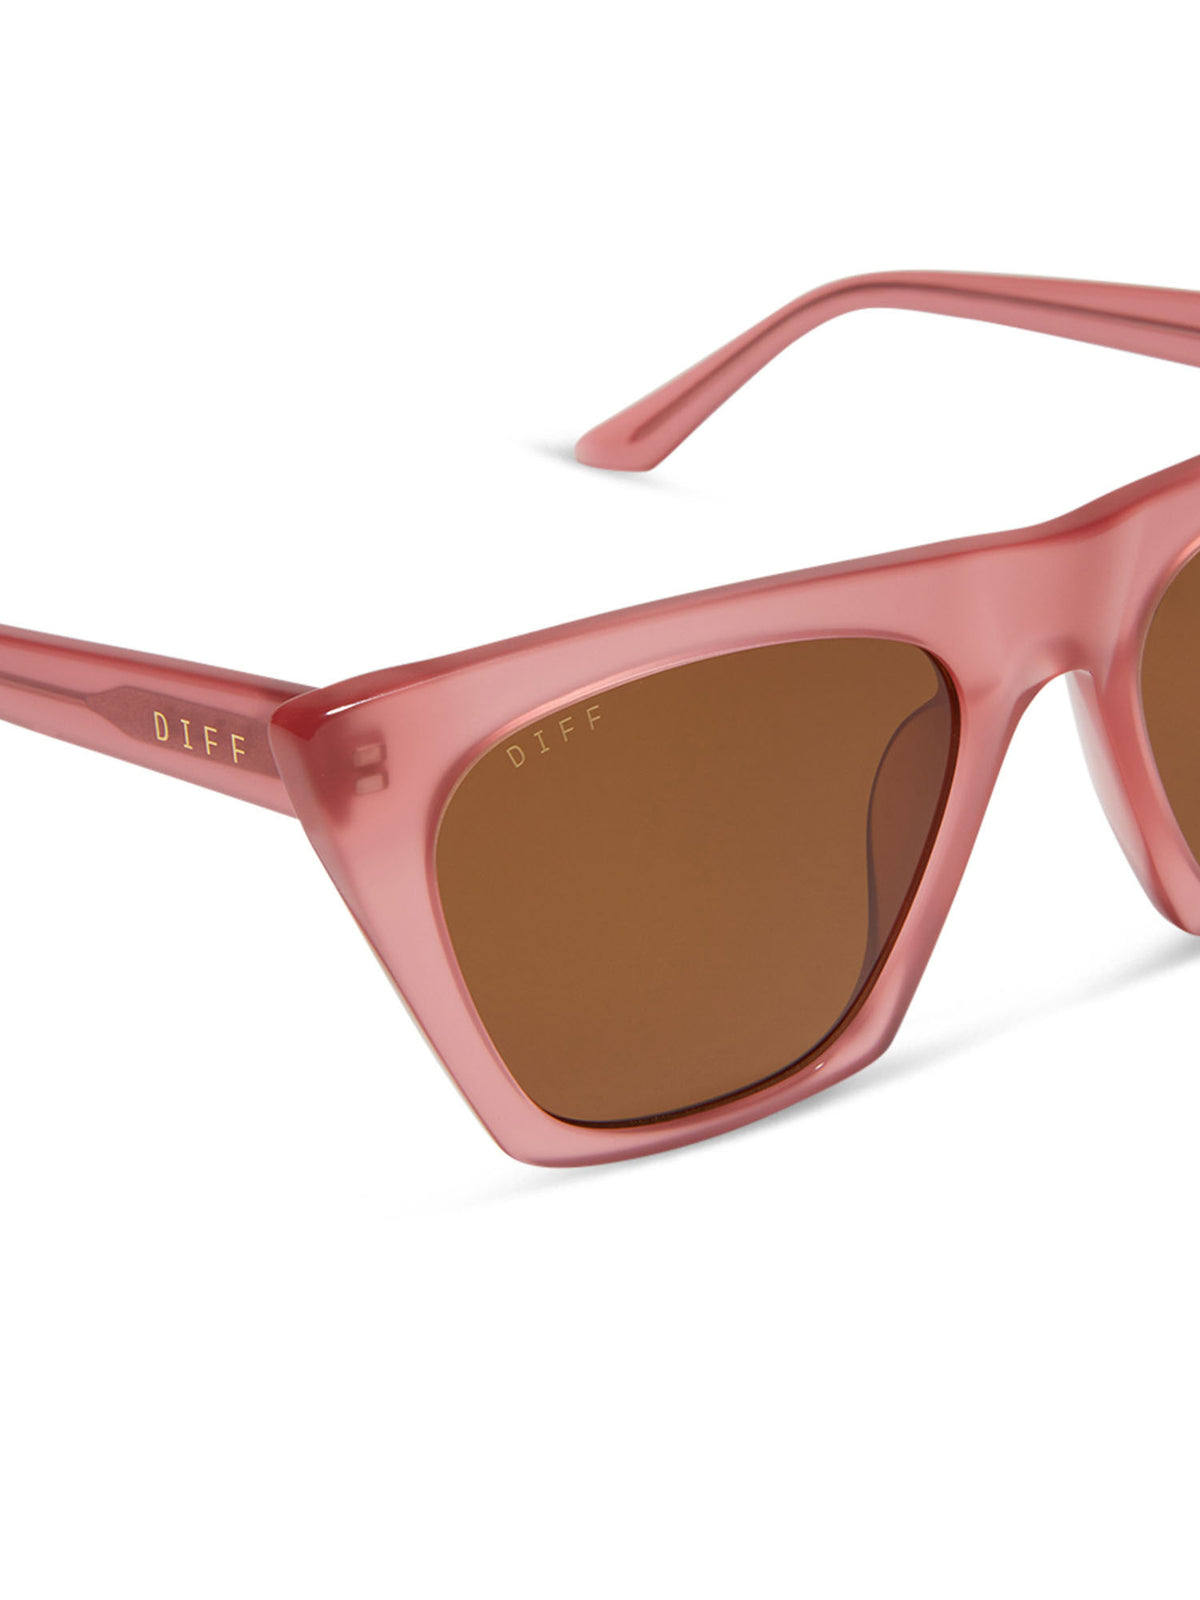 diff eyewear avril sunglasses in guava brown